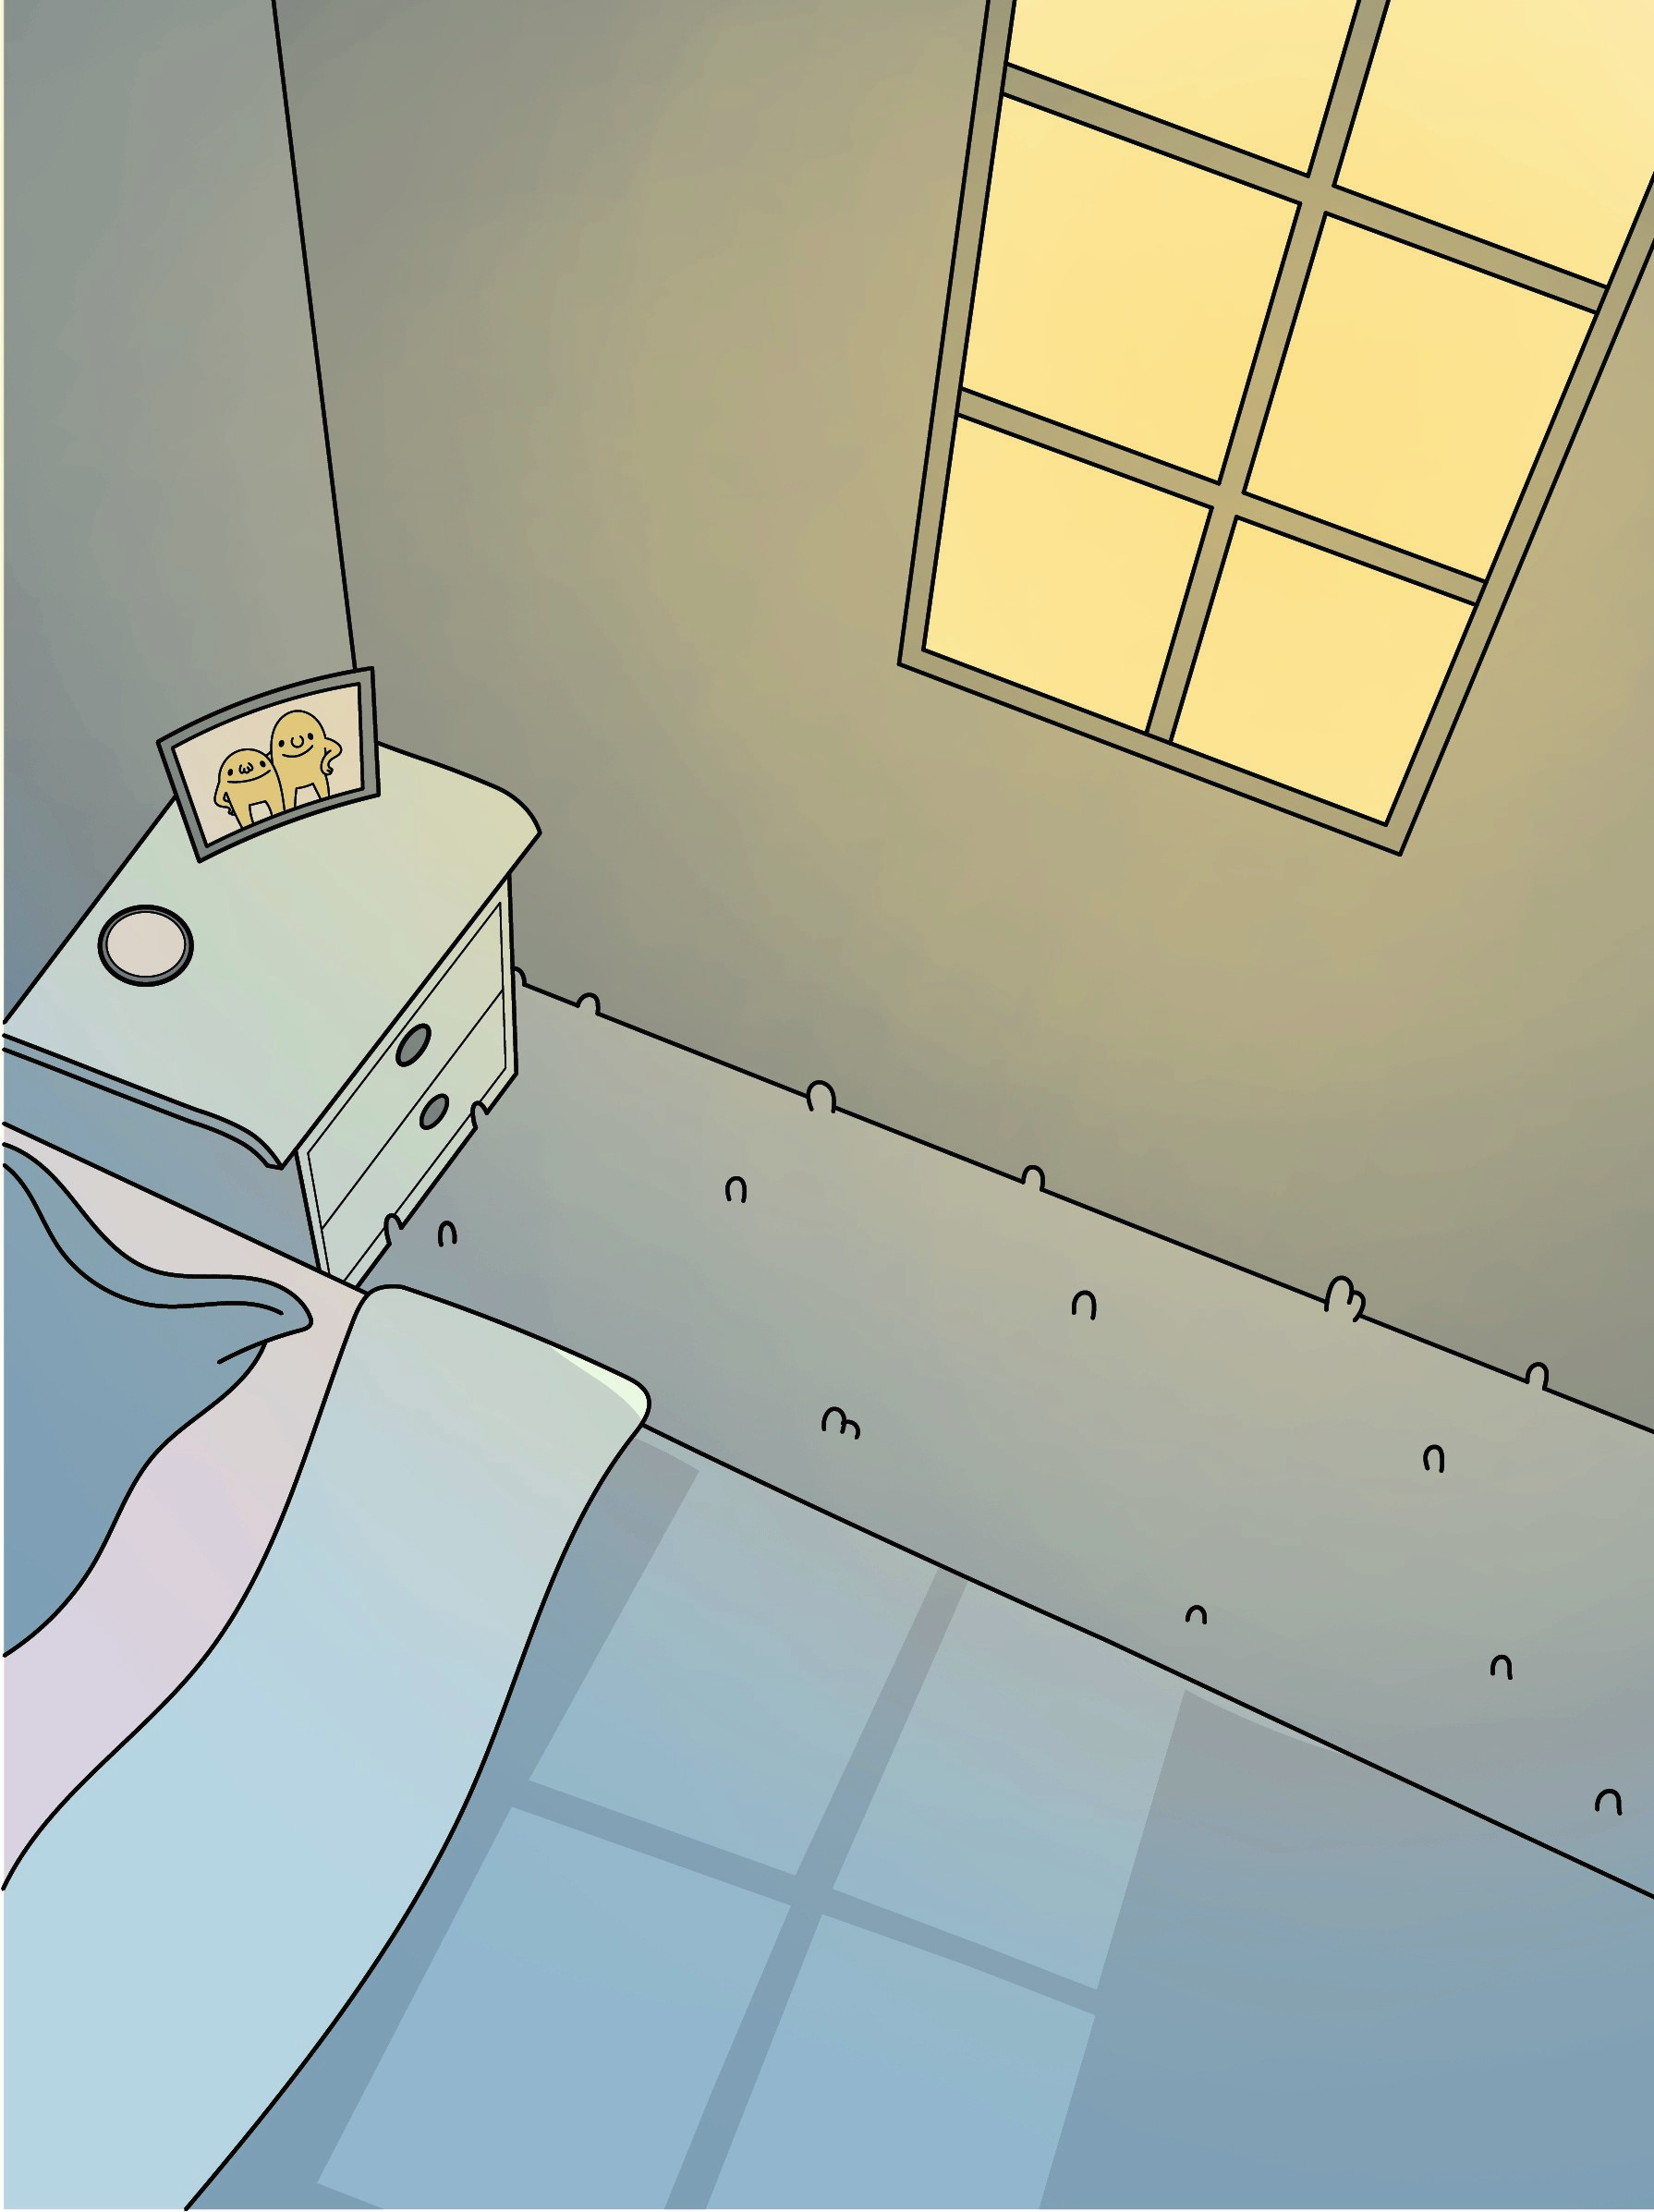 BA Illustration work by Abigail Pearce showing an empty room with the bed made.